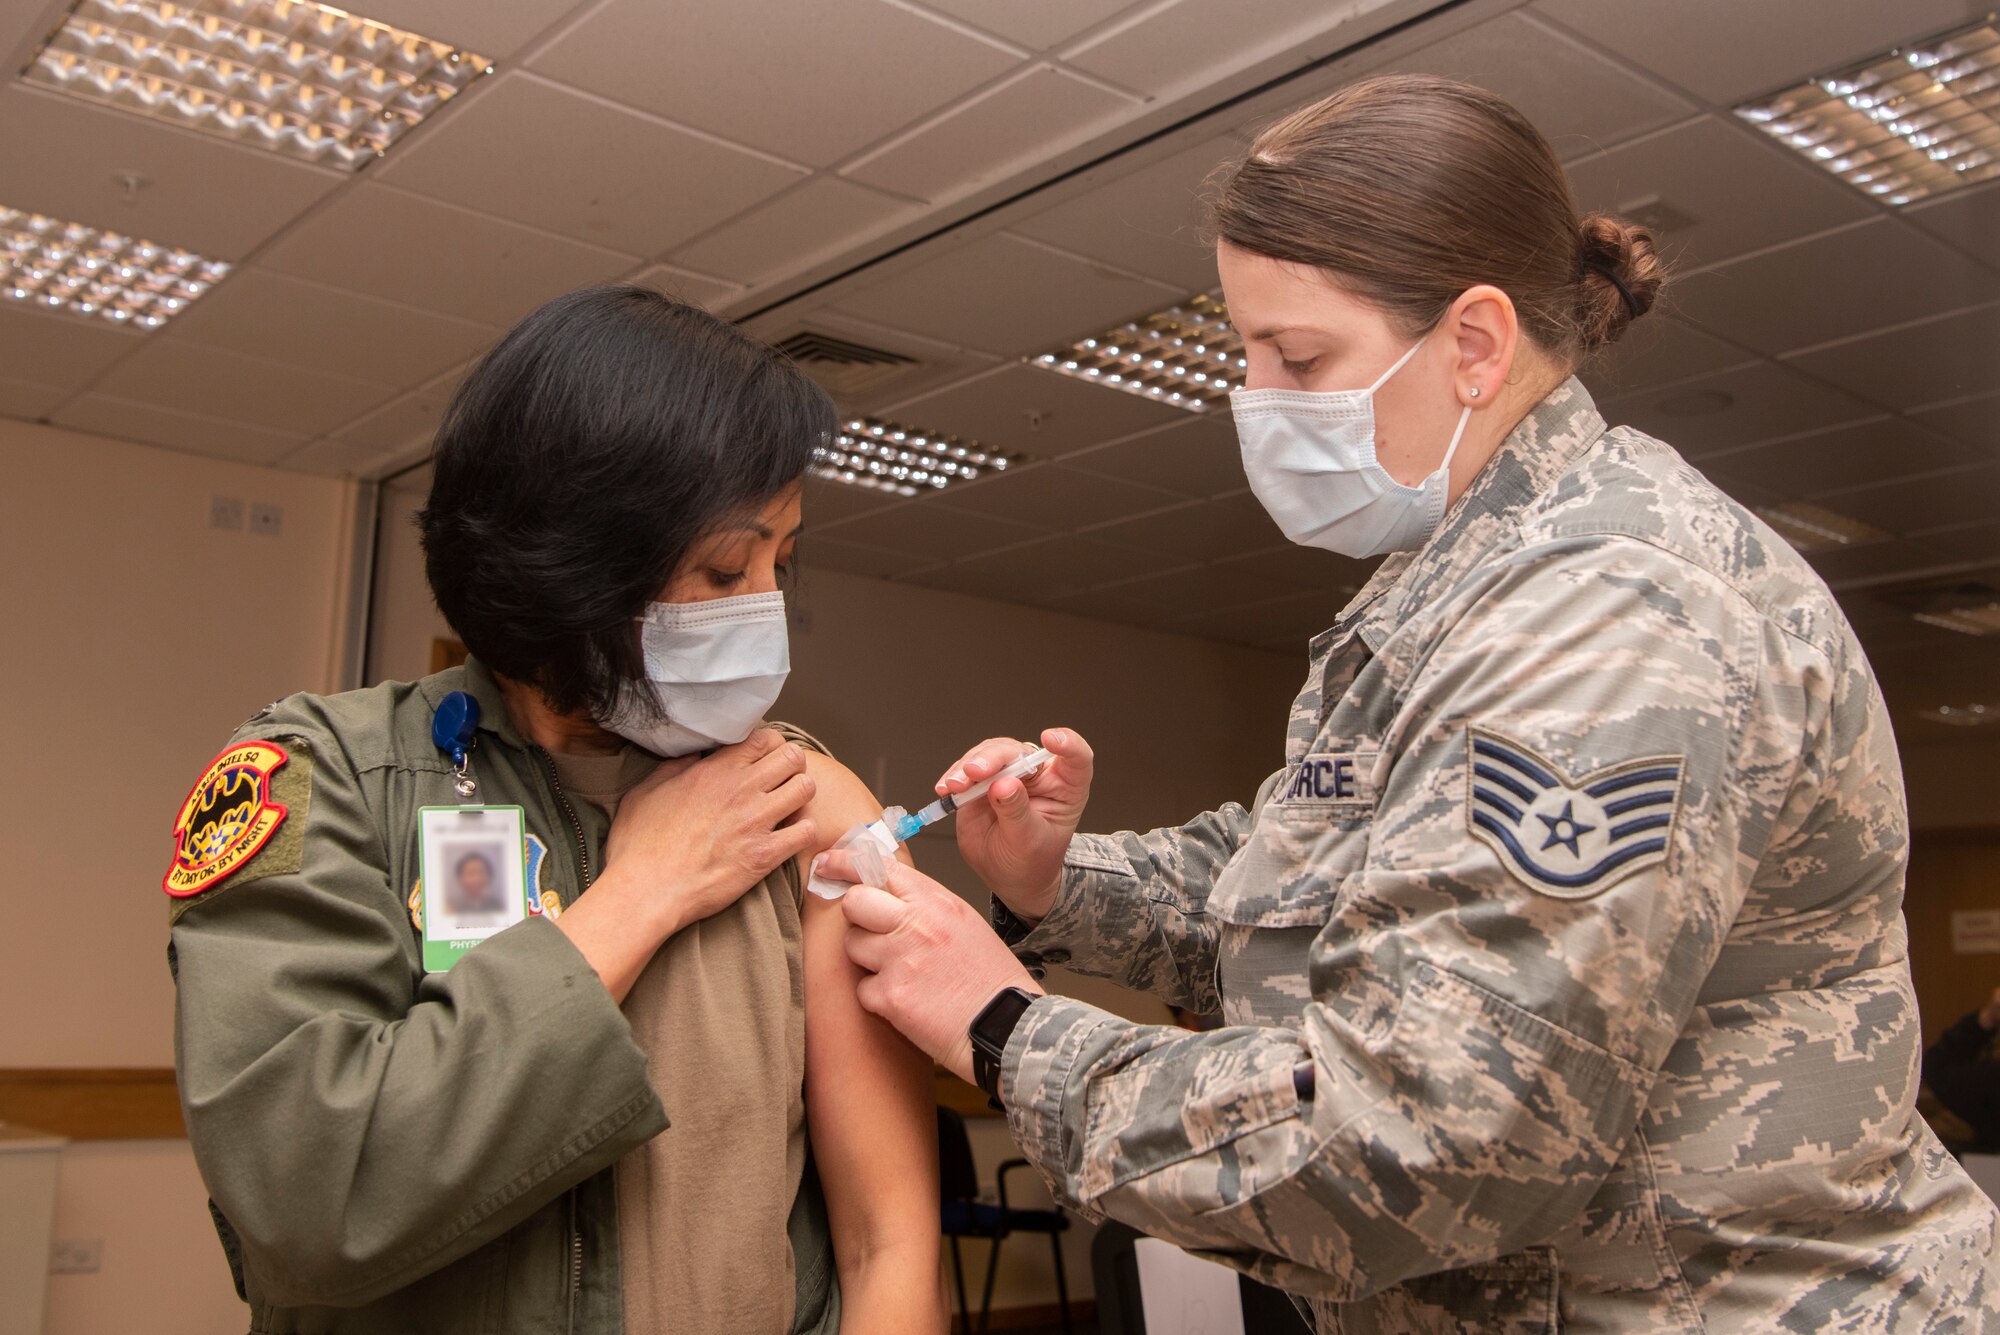 U.S. Air Force Staff Sgt. Anna Murray, 48th Healthcare Operations Squadron immunizations technician, administers a dose of the COVID-19 vaccine to Lt. Col. Rhodora Beckinger, 488th Intelligence Squadron flight surgeon, Jan. 5, 2021, at Royal Air Force Lakenheath, England. Beckinger was the first member of Team Mildenhall to receive the vaccine from the Air Force. (U.S. Air Force photo by Senior Airman Joseph Barron)